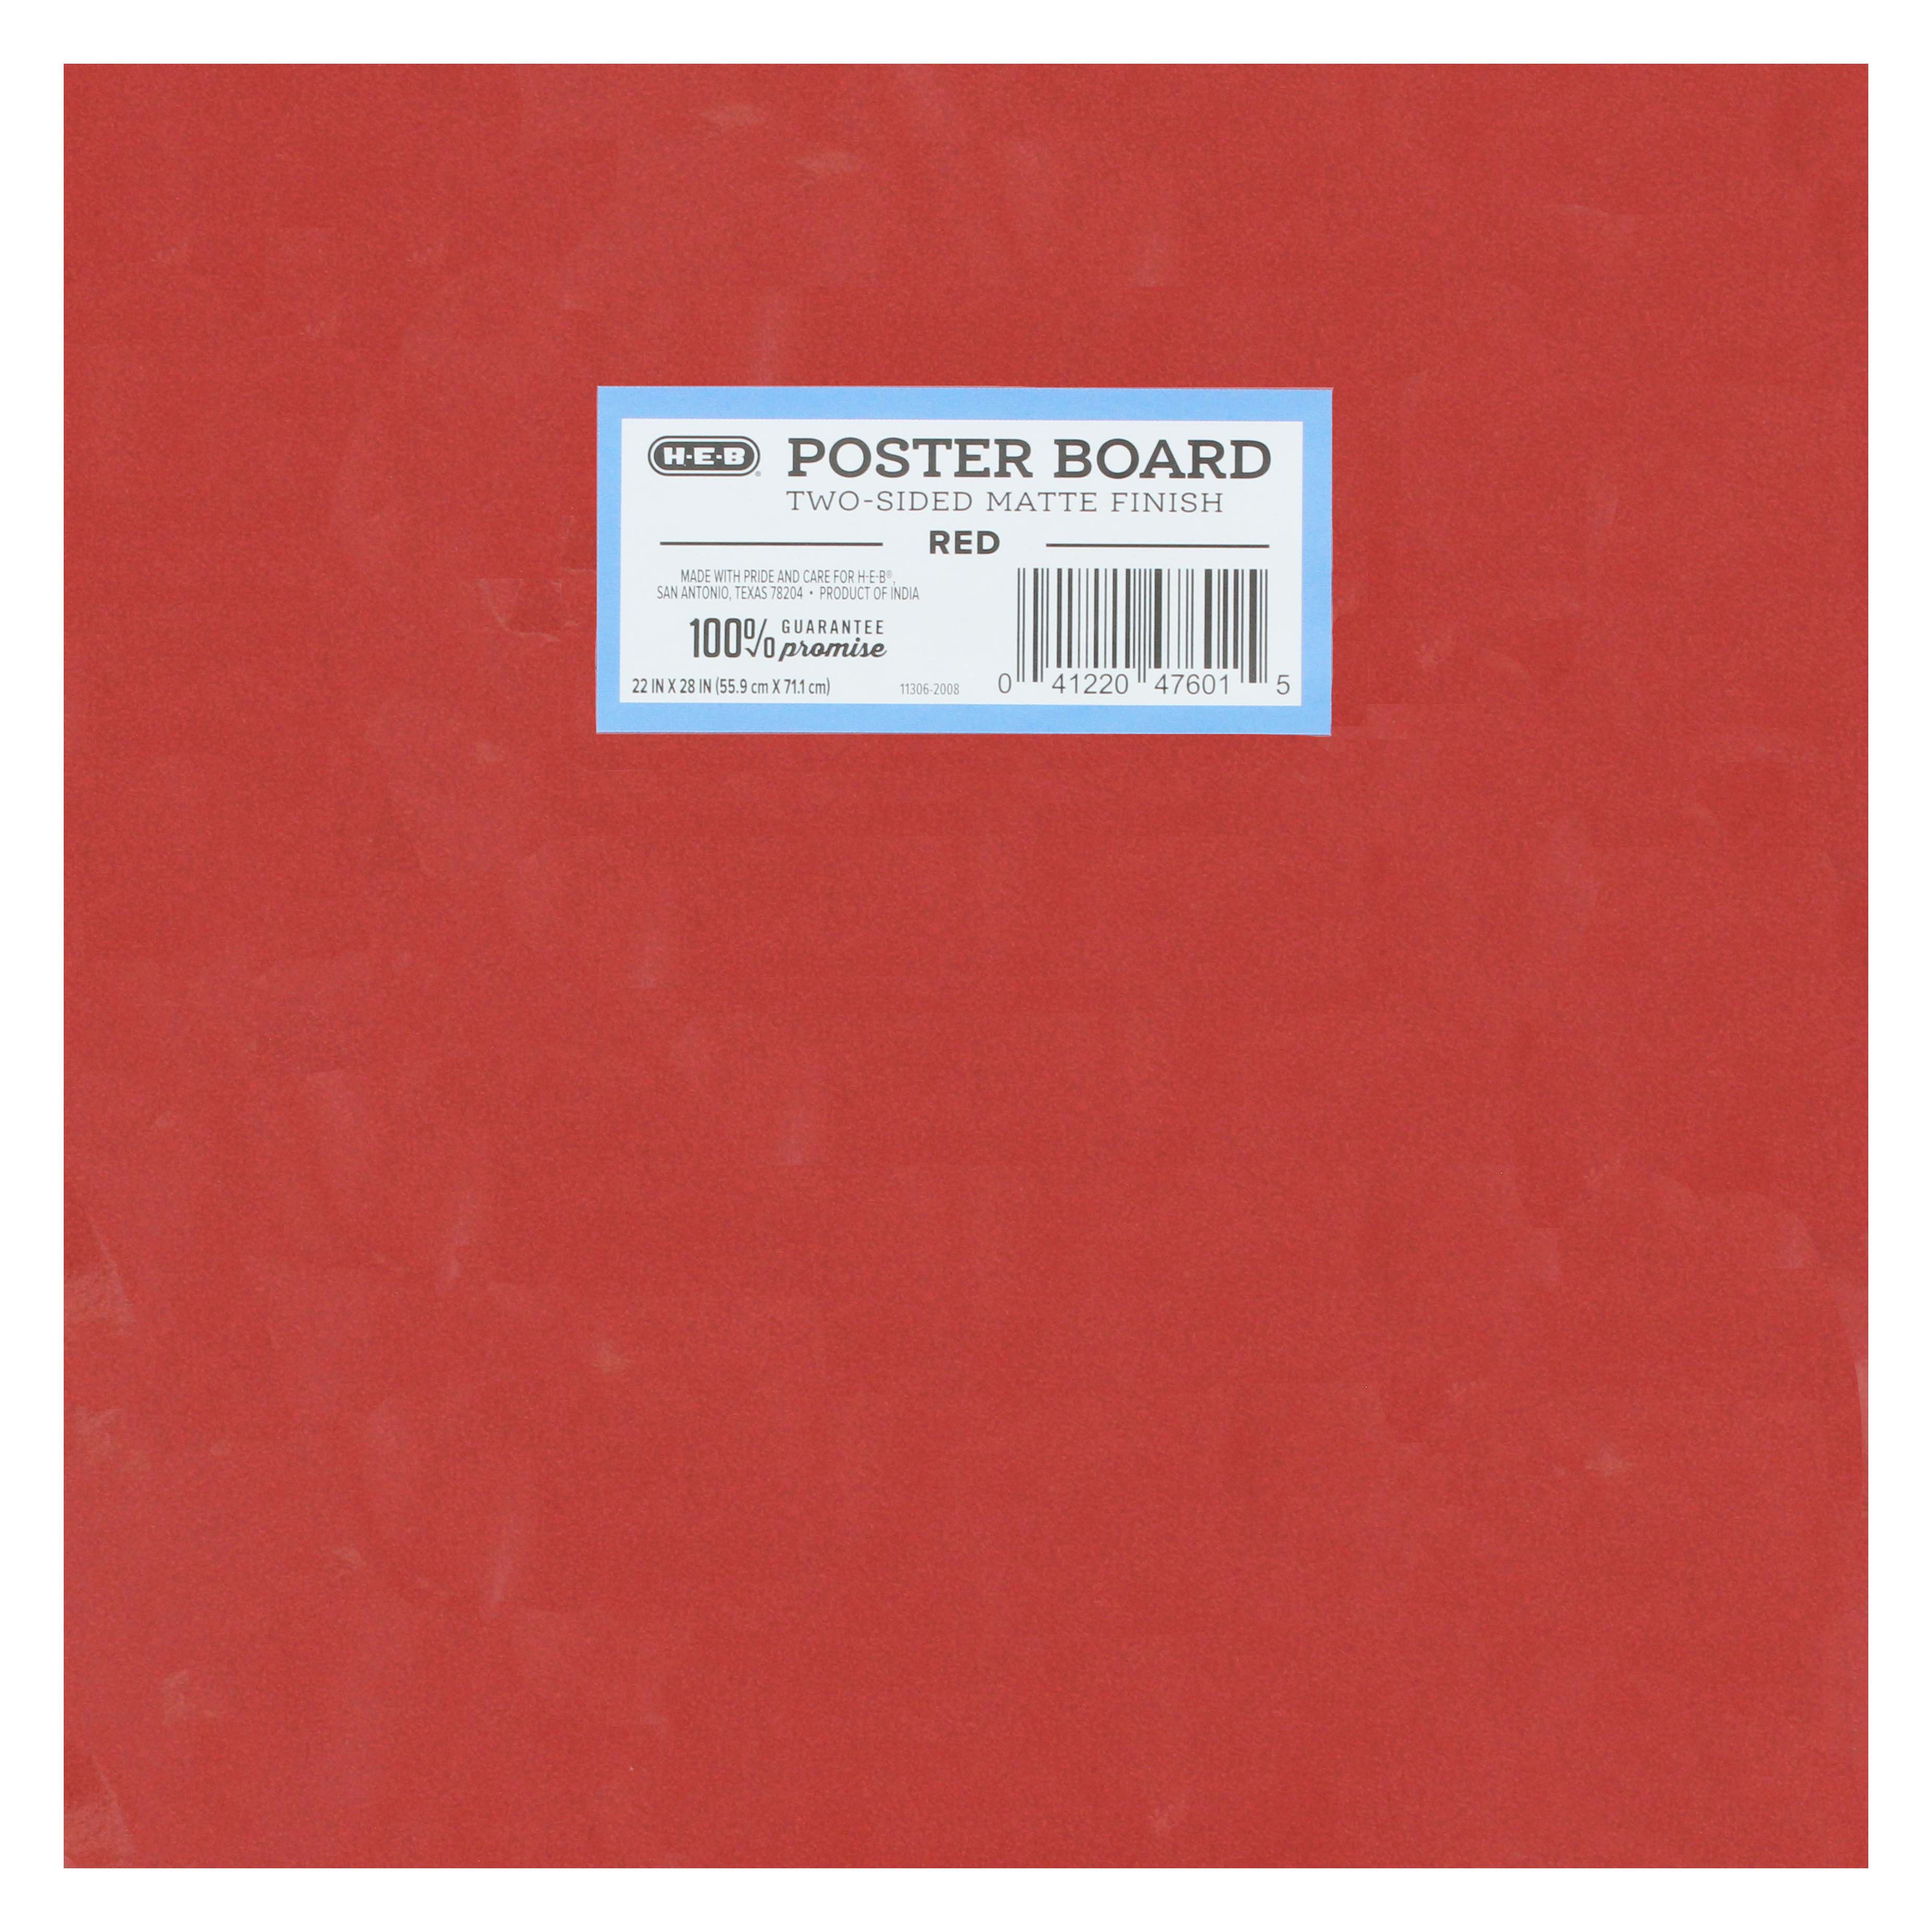 H-E-B Dual Sided Poster Board - Red Matte